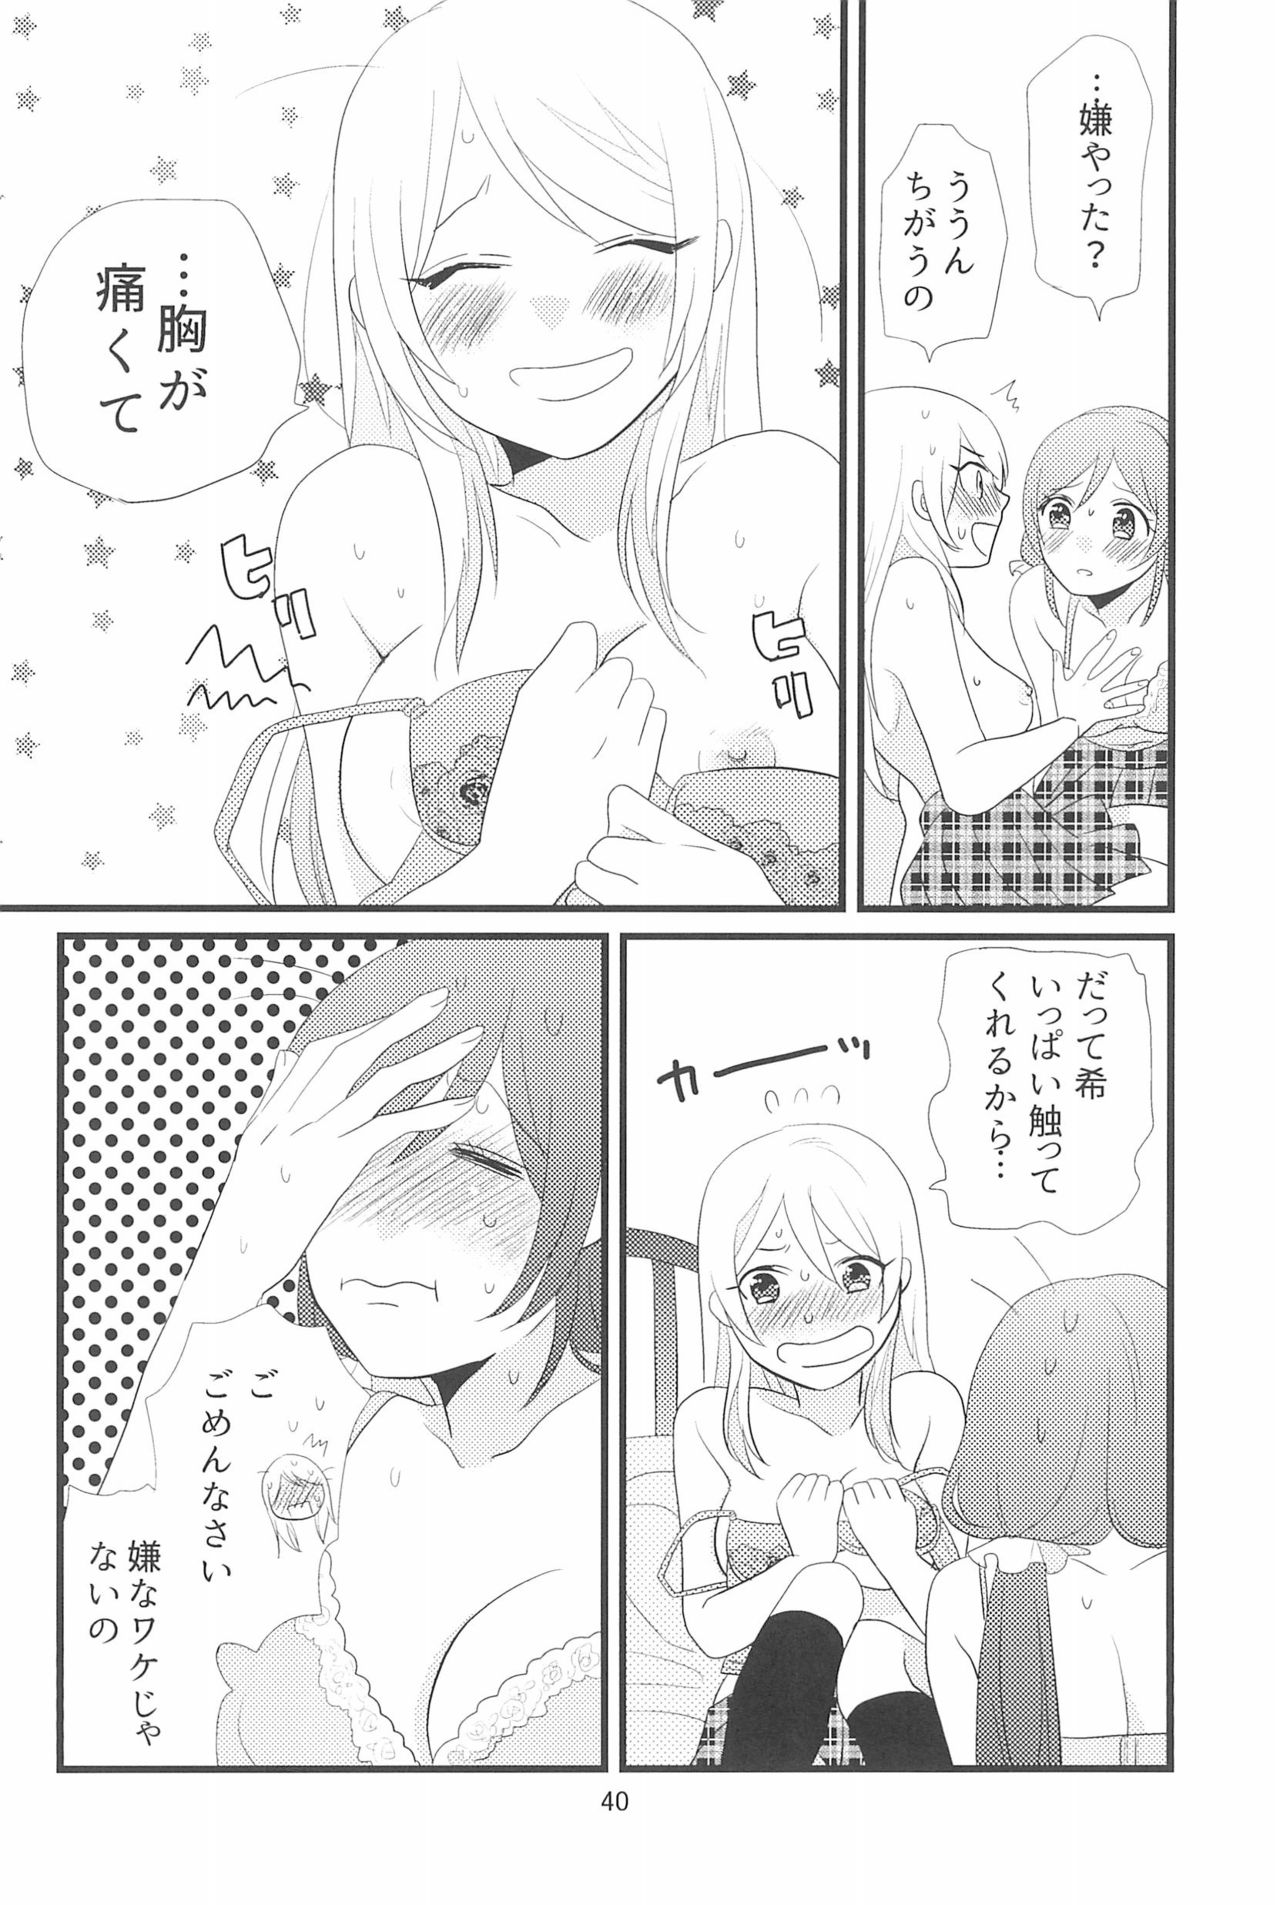 (C90) [BK*N2 (Mikawa Miso)] HAPPY GO LUCKY DAYS (Love Live!) page 44 full